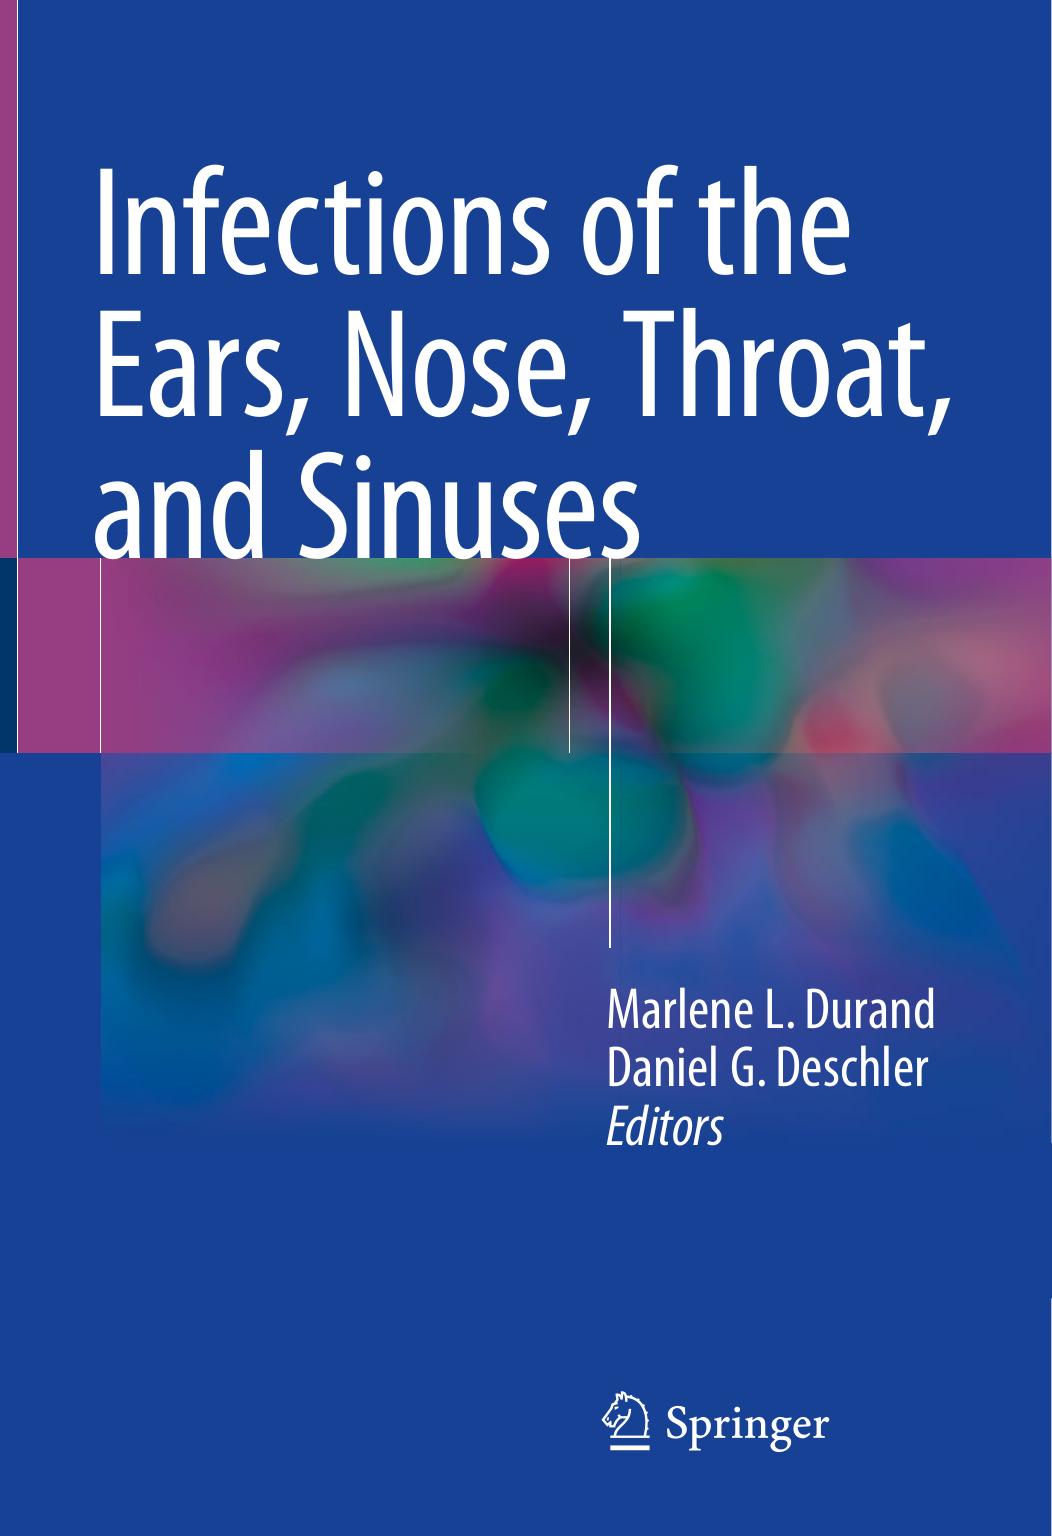 Infections of the ears, nose, throat, and sinuses ( PDFDrive )